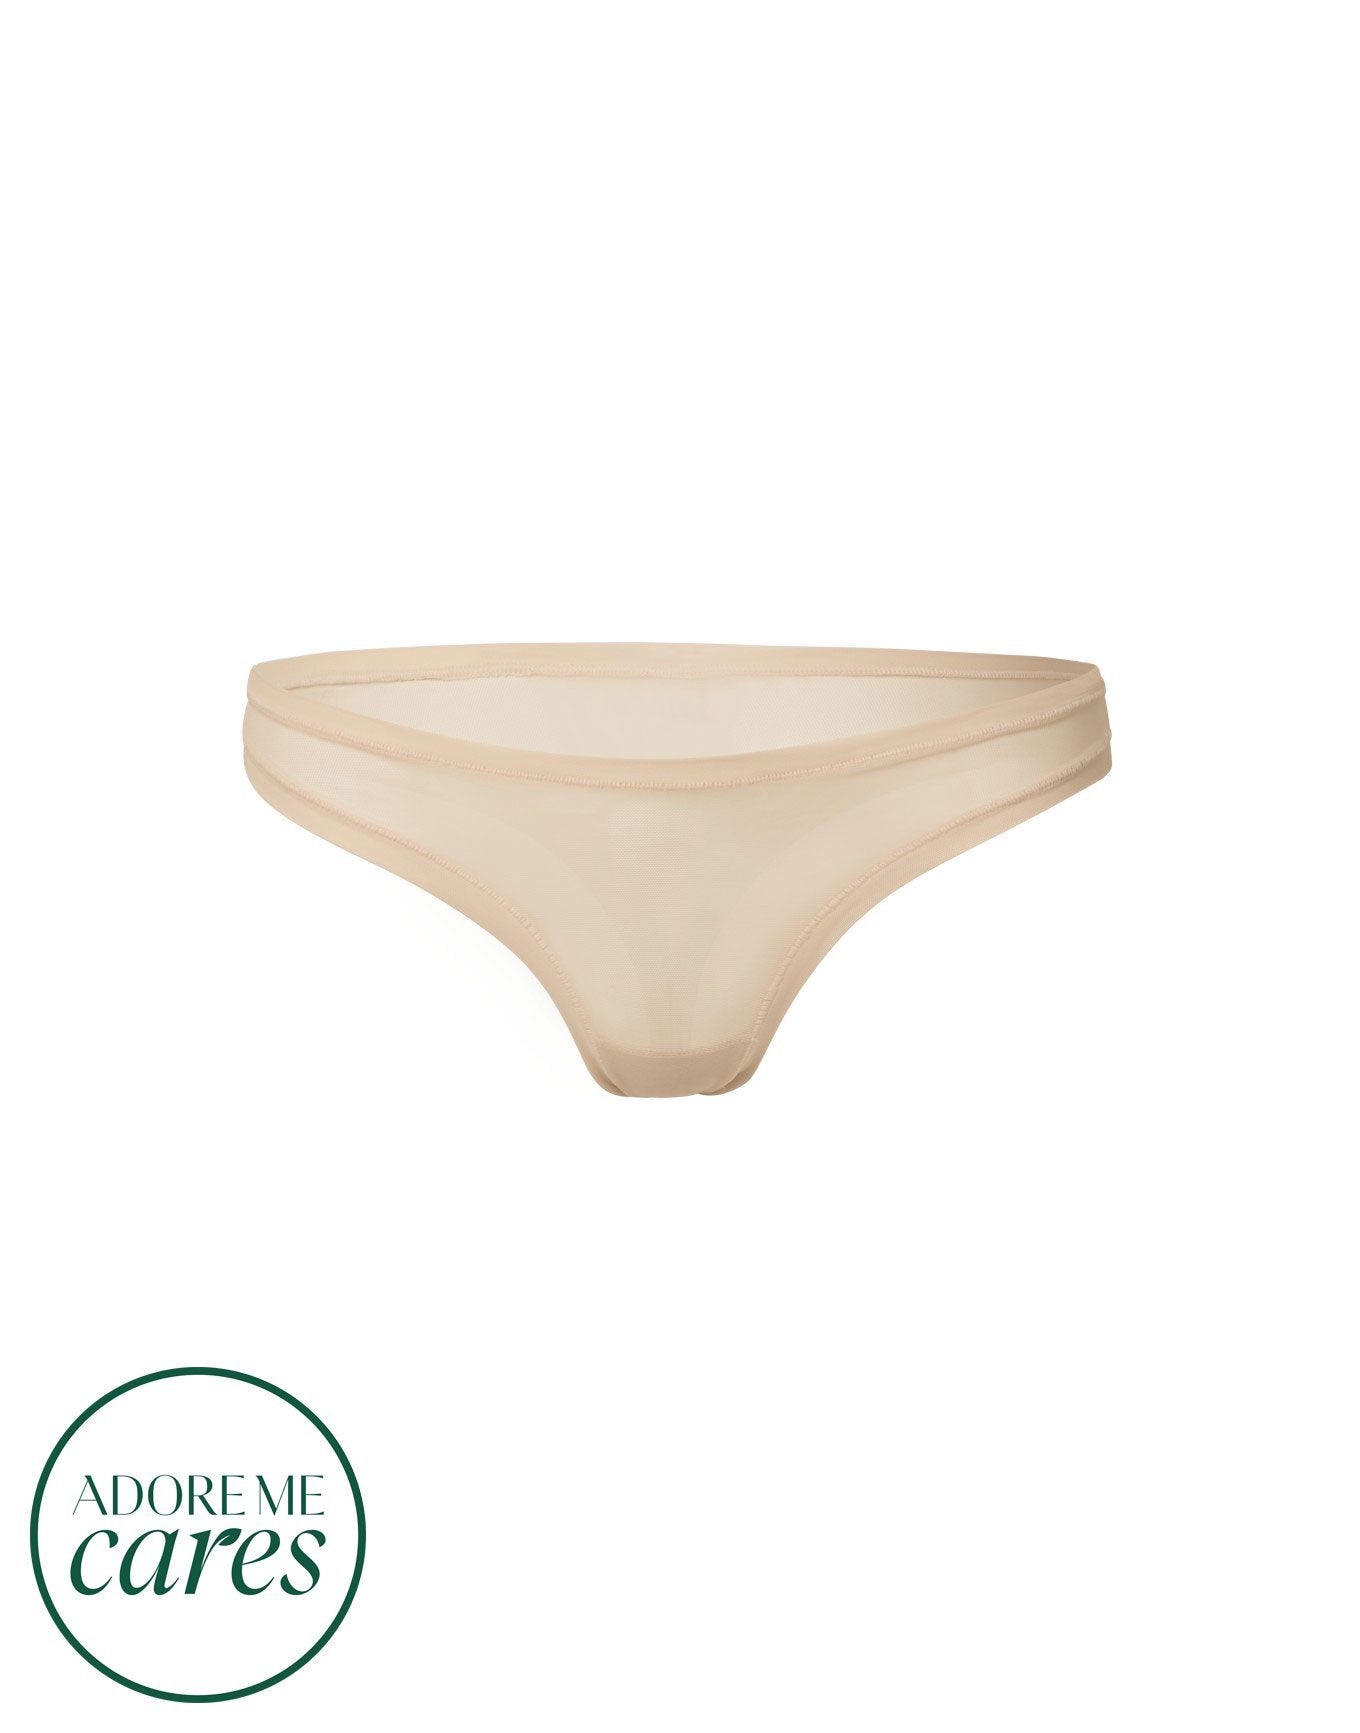 nueskin Bonnie Mesh Low-Rise Thong in color Appleblossom and shape thong